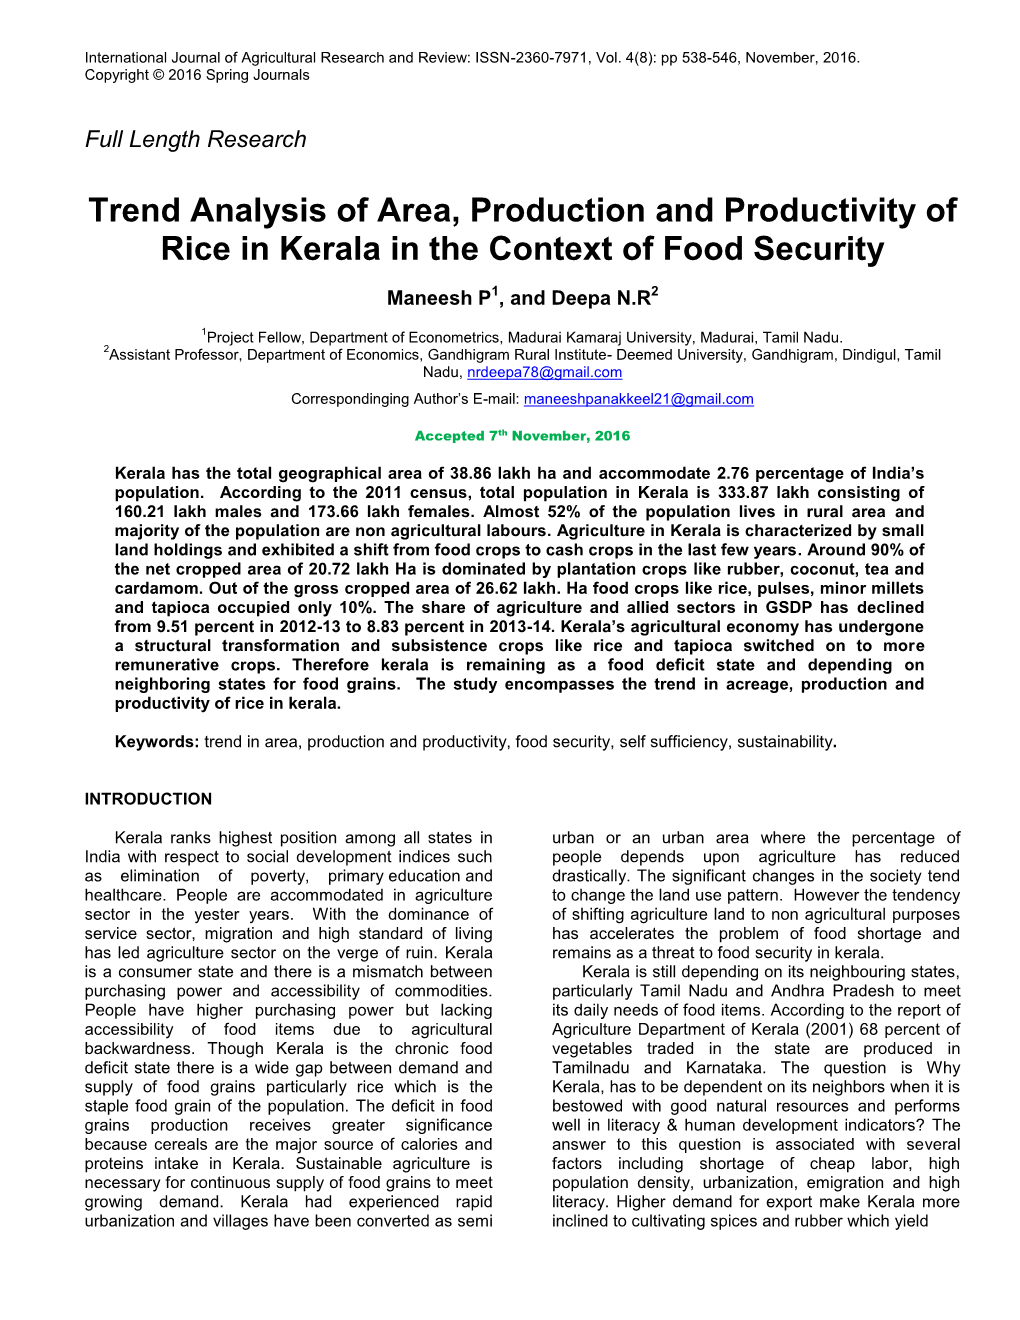 Trend Analysis of Area, Production and Productivity of Rice in Kerala in the Context of Food Security